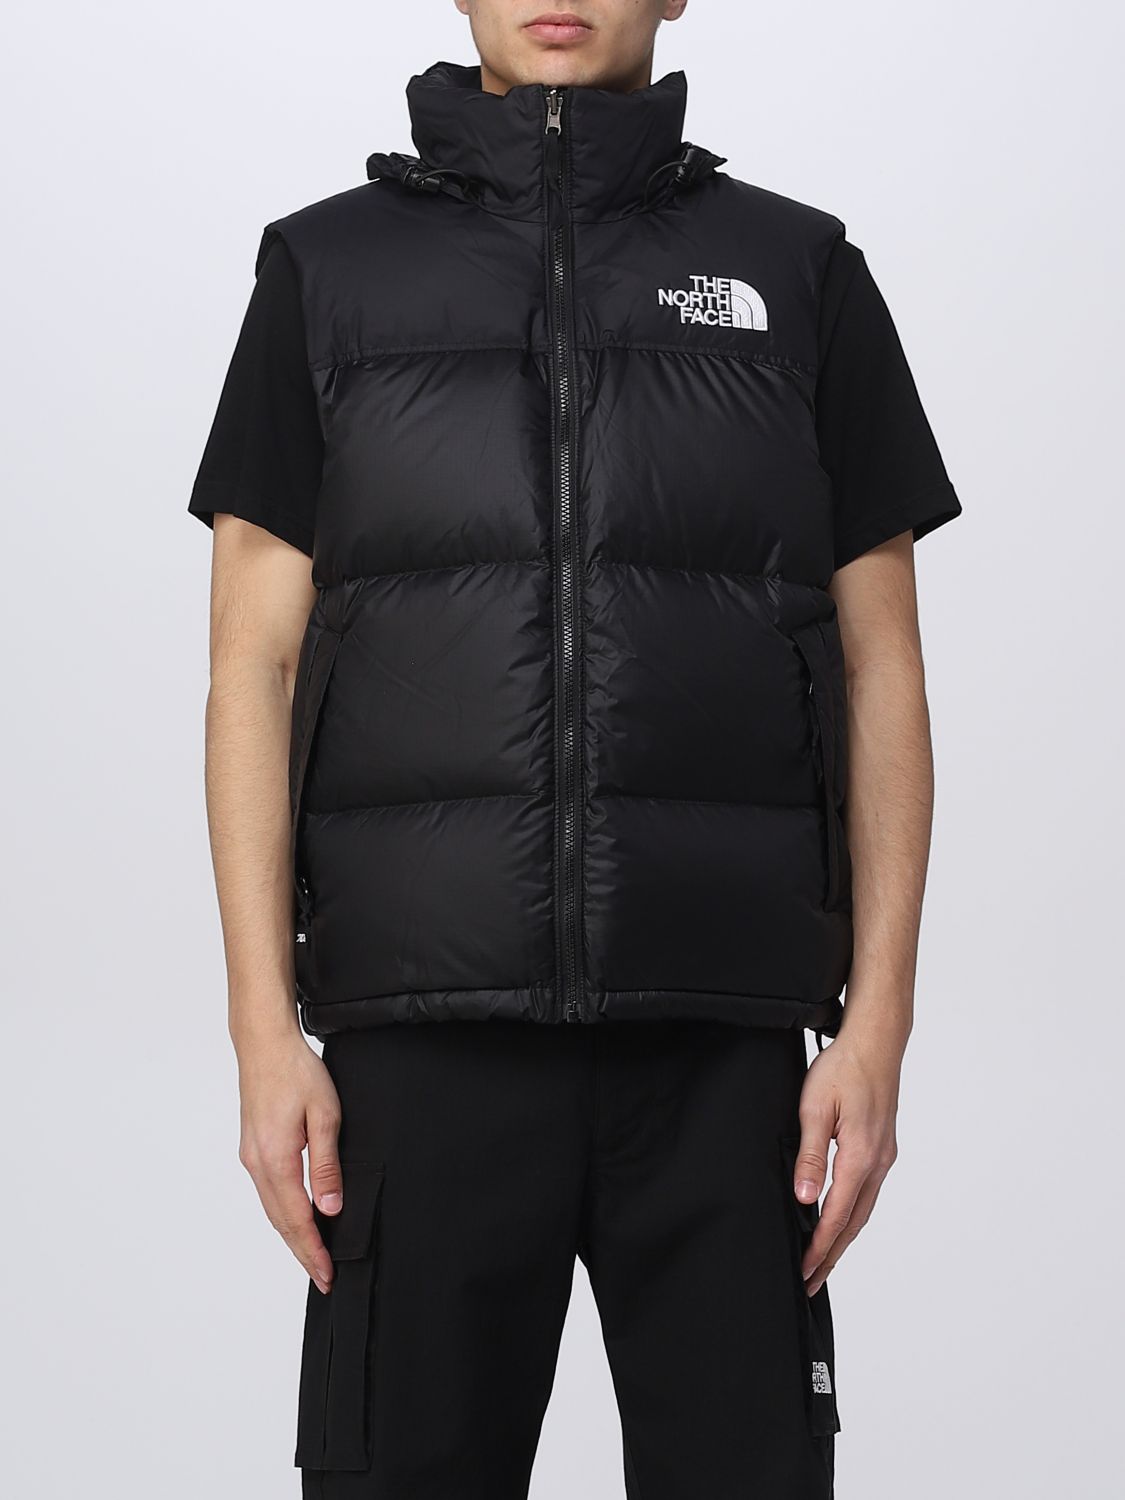 THE NORTH FACE: jacket for man - Black | The North Face jacket NF0A3JQQ ...